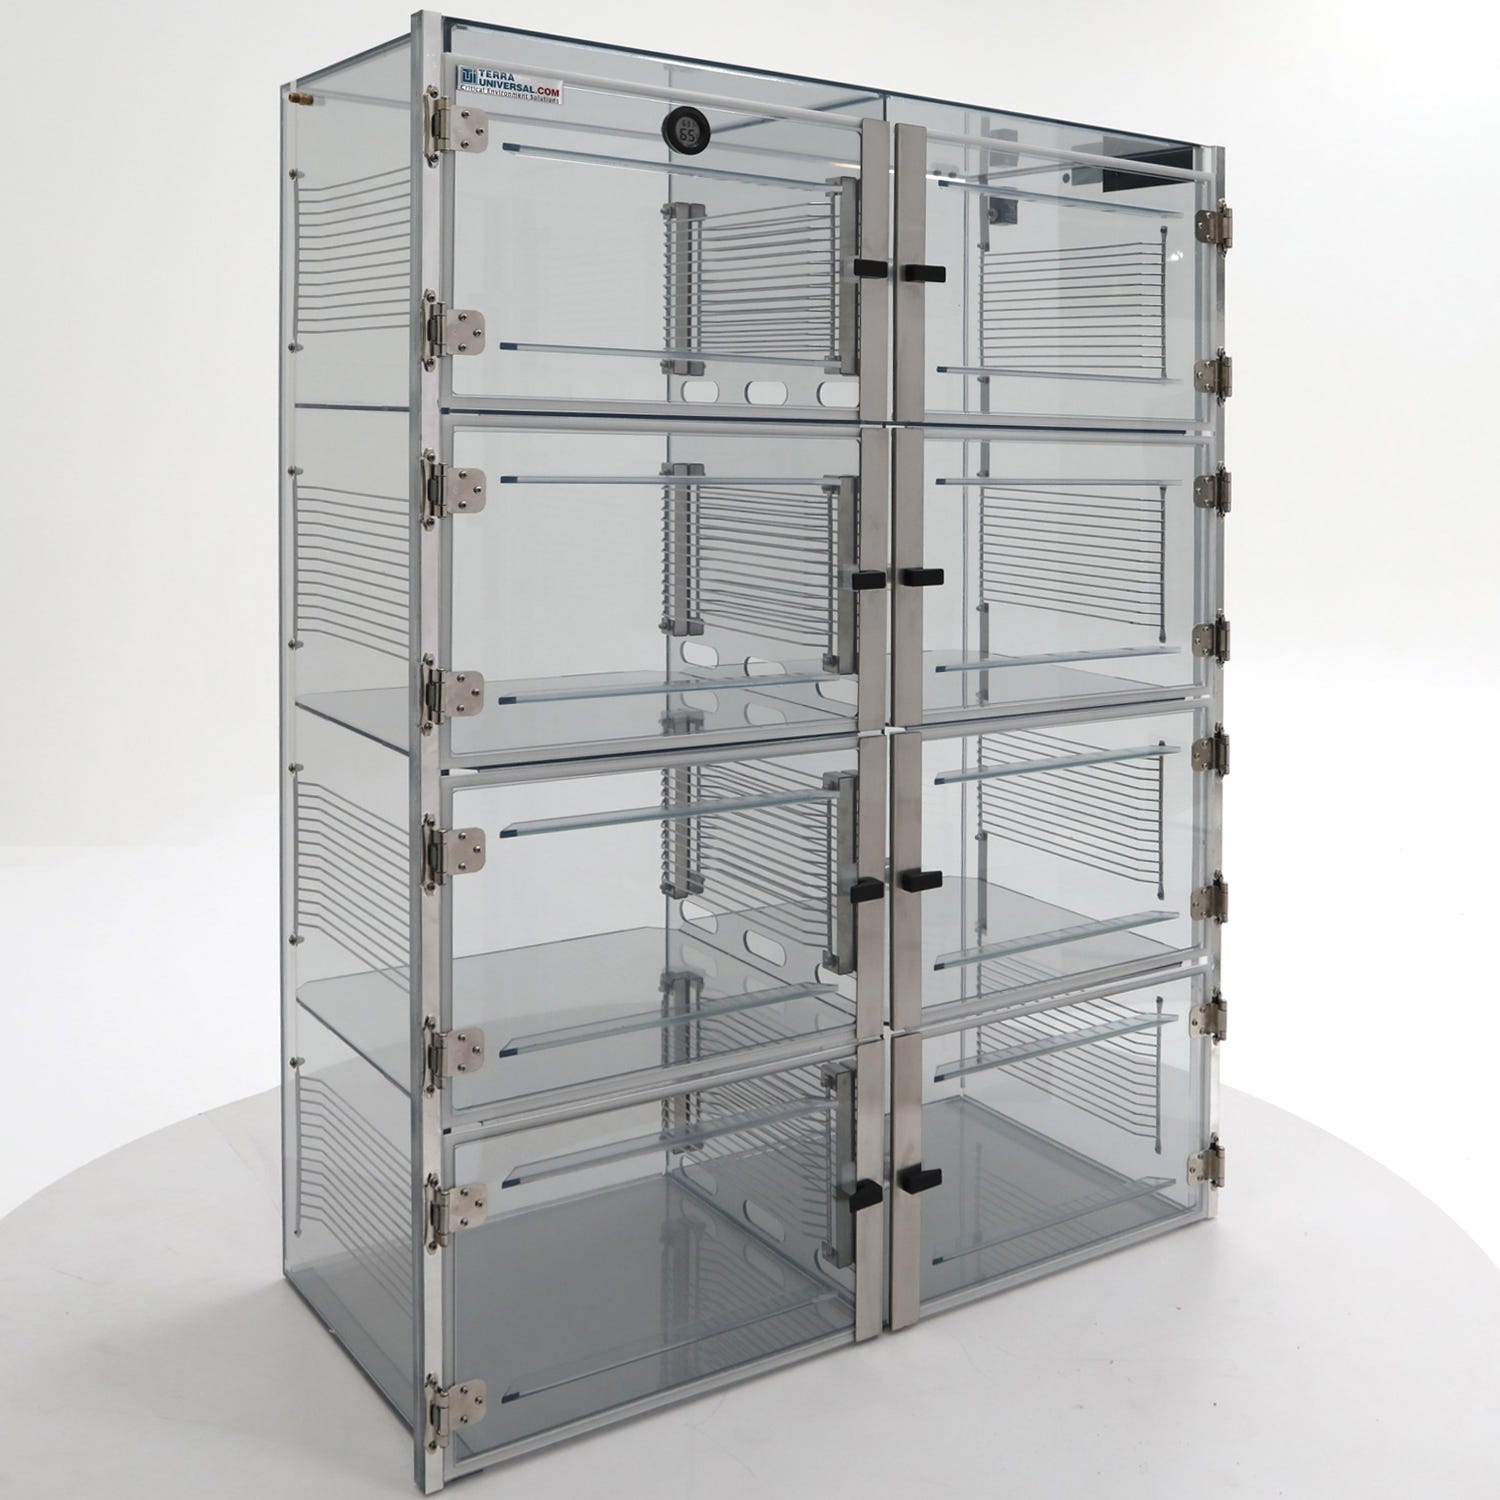 Static-safe desiccator cabinet in SDPVC with 8 chambers and adjustable shelving